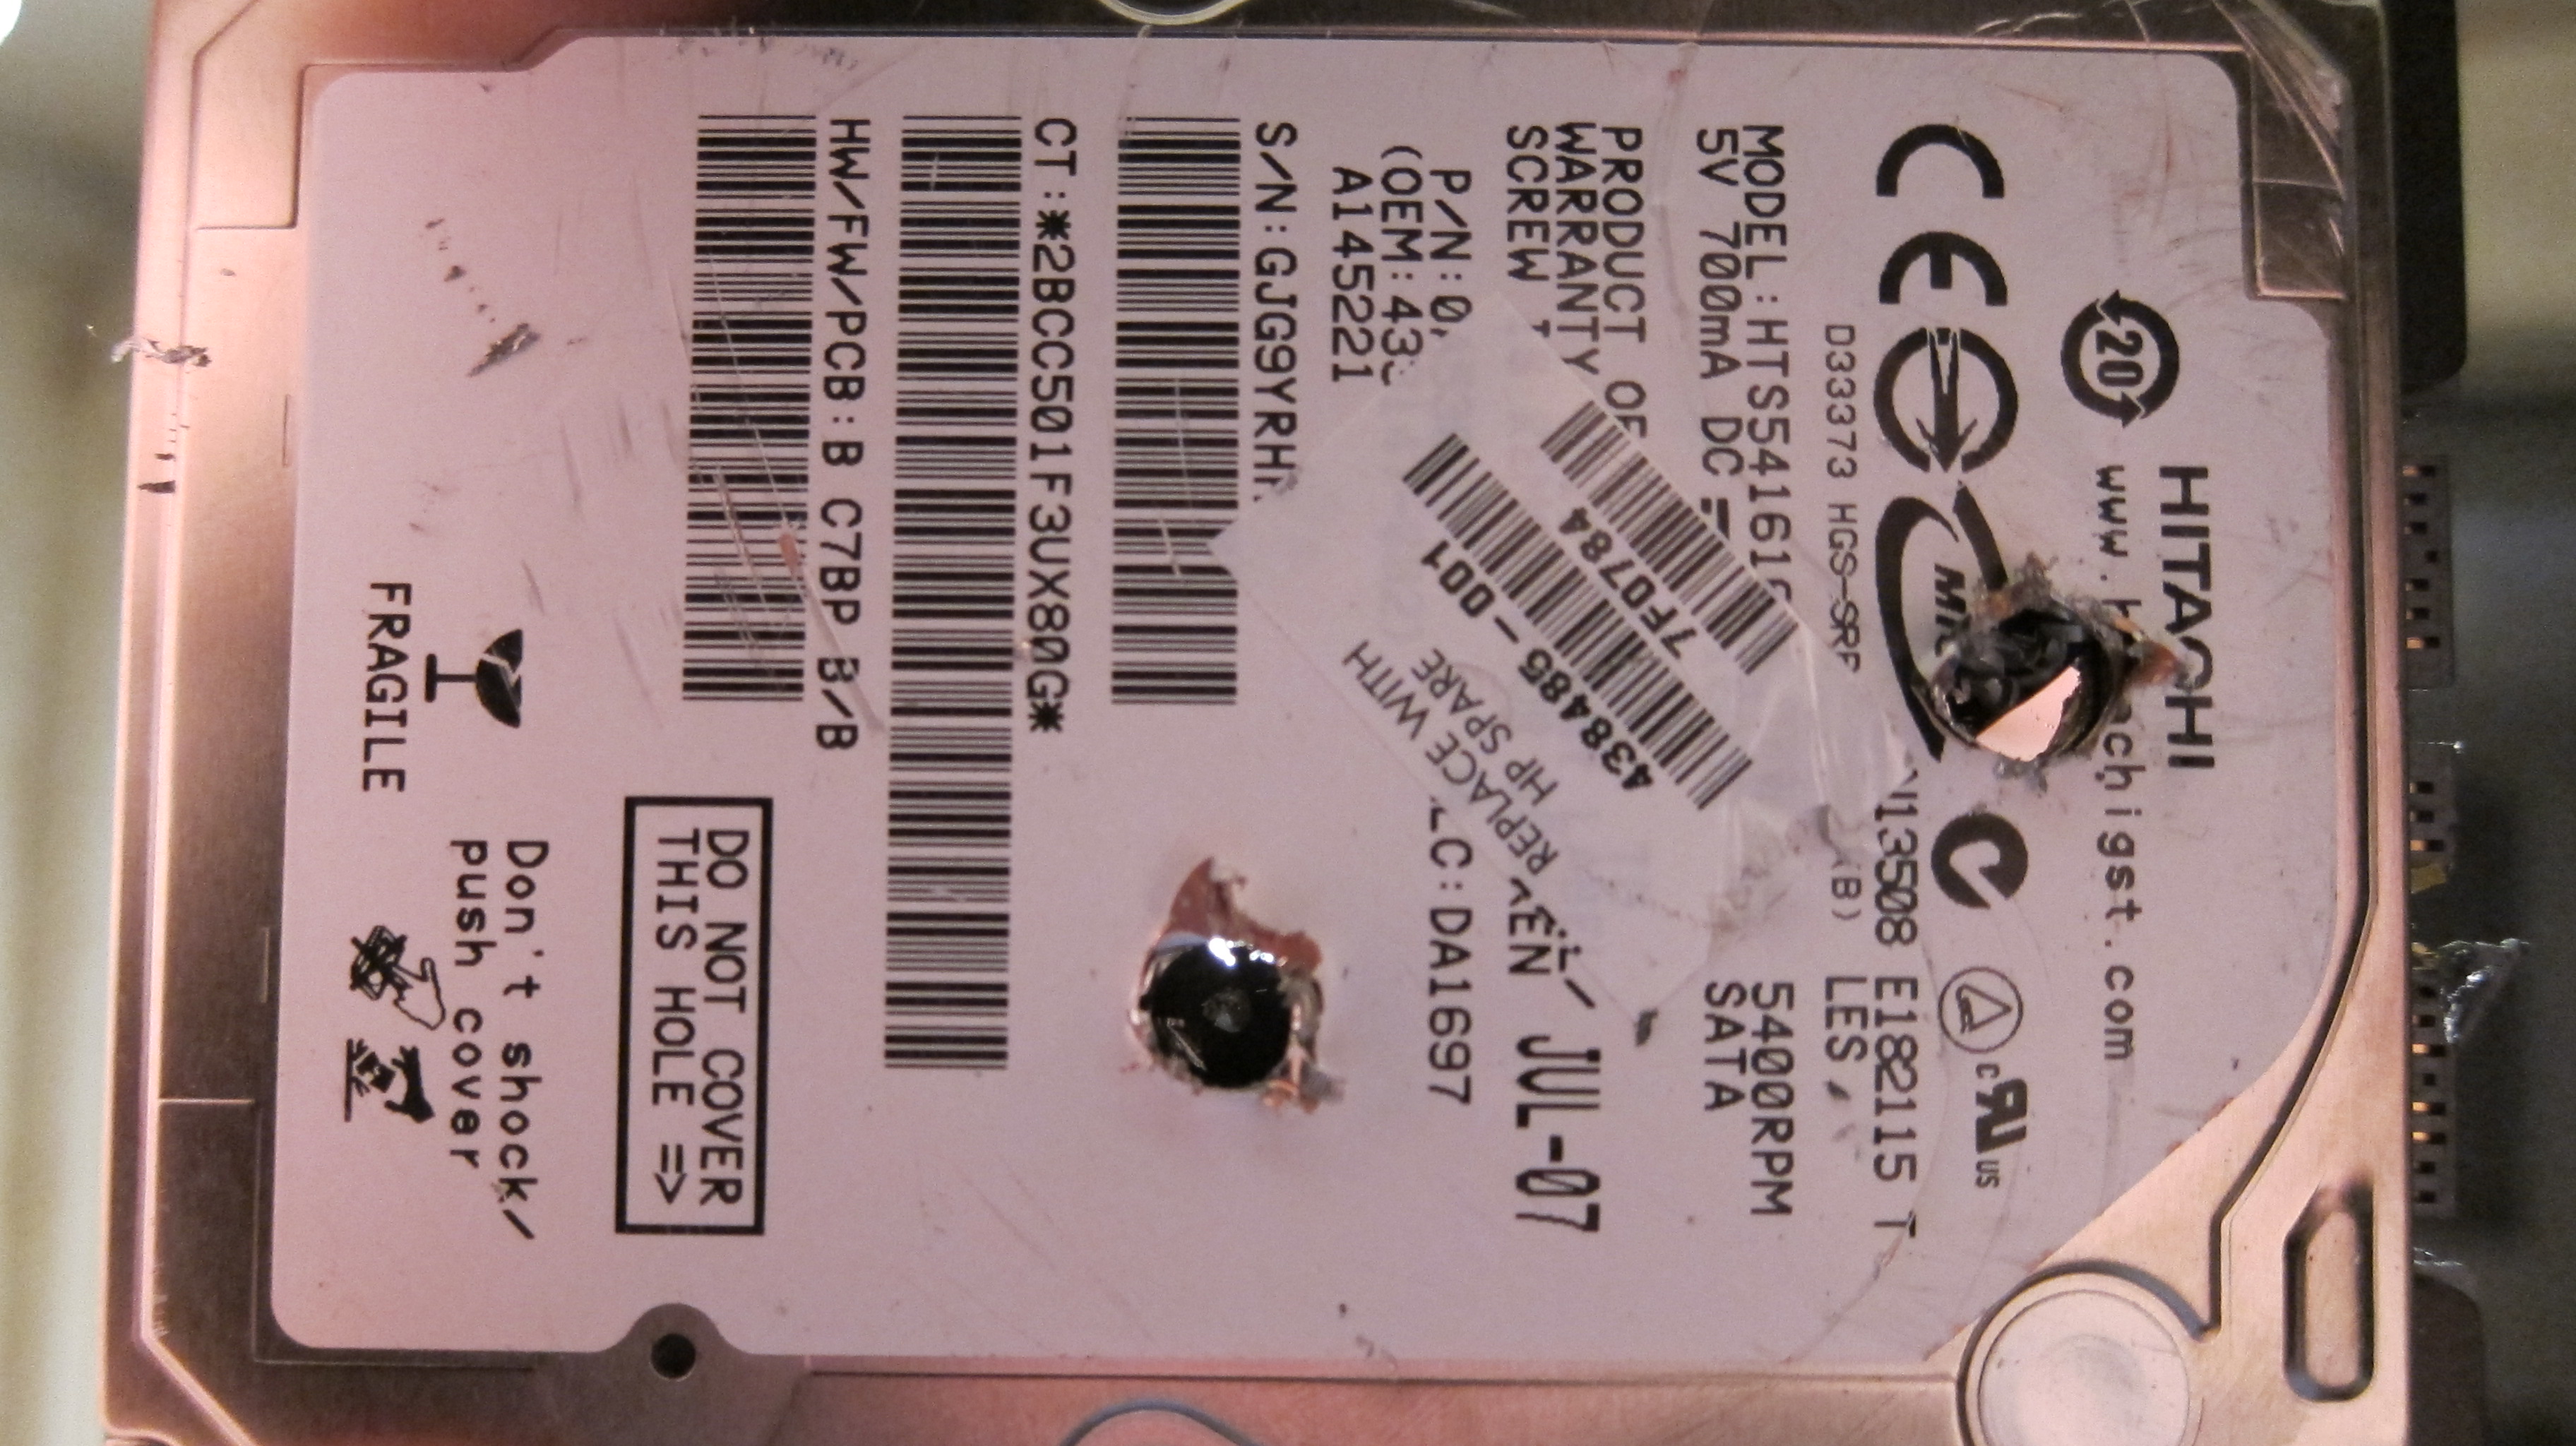 Drilling a laptop hard drive